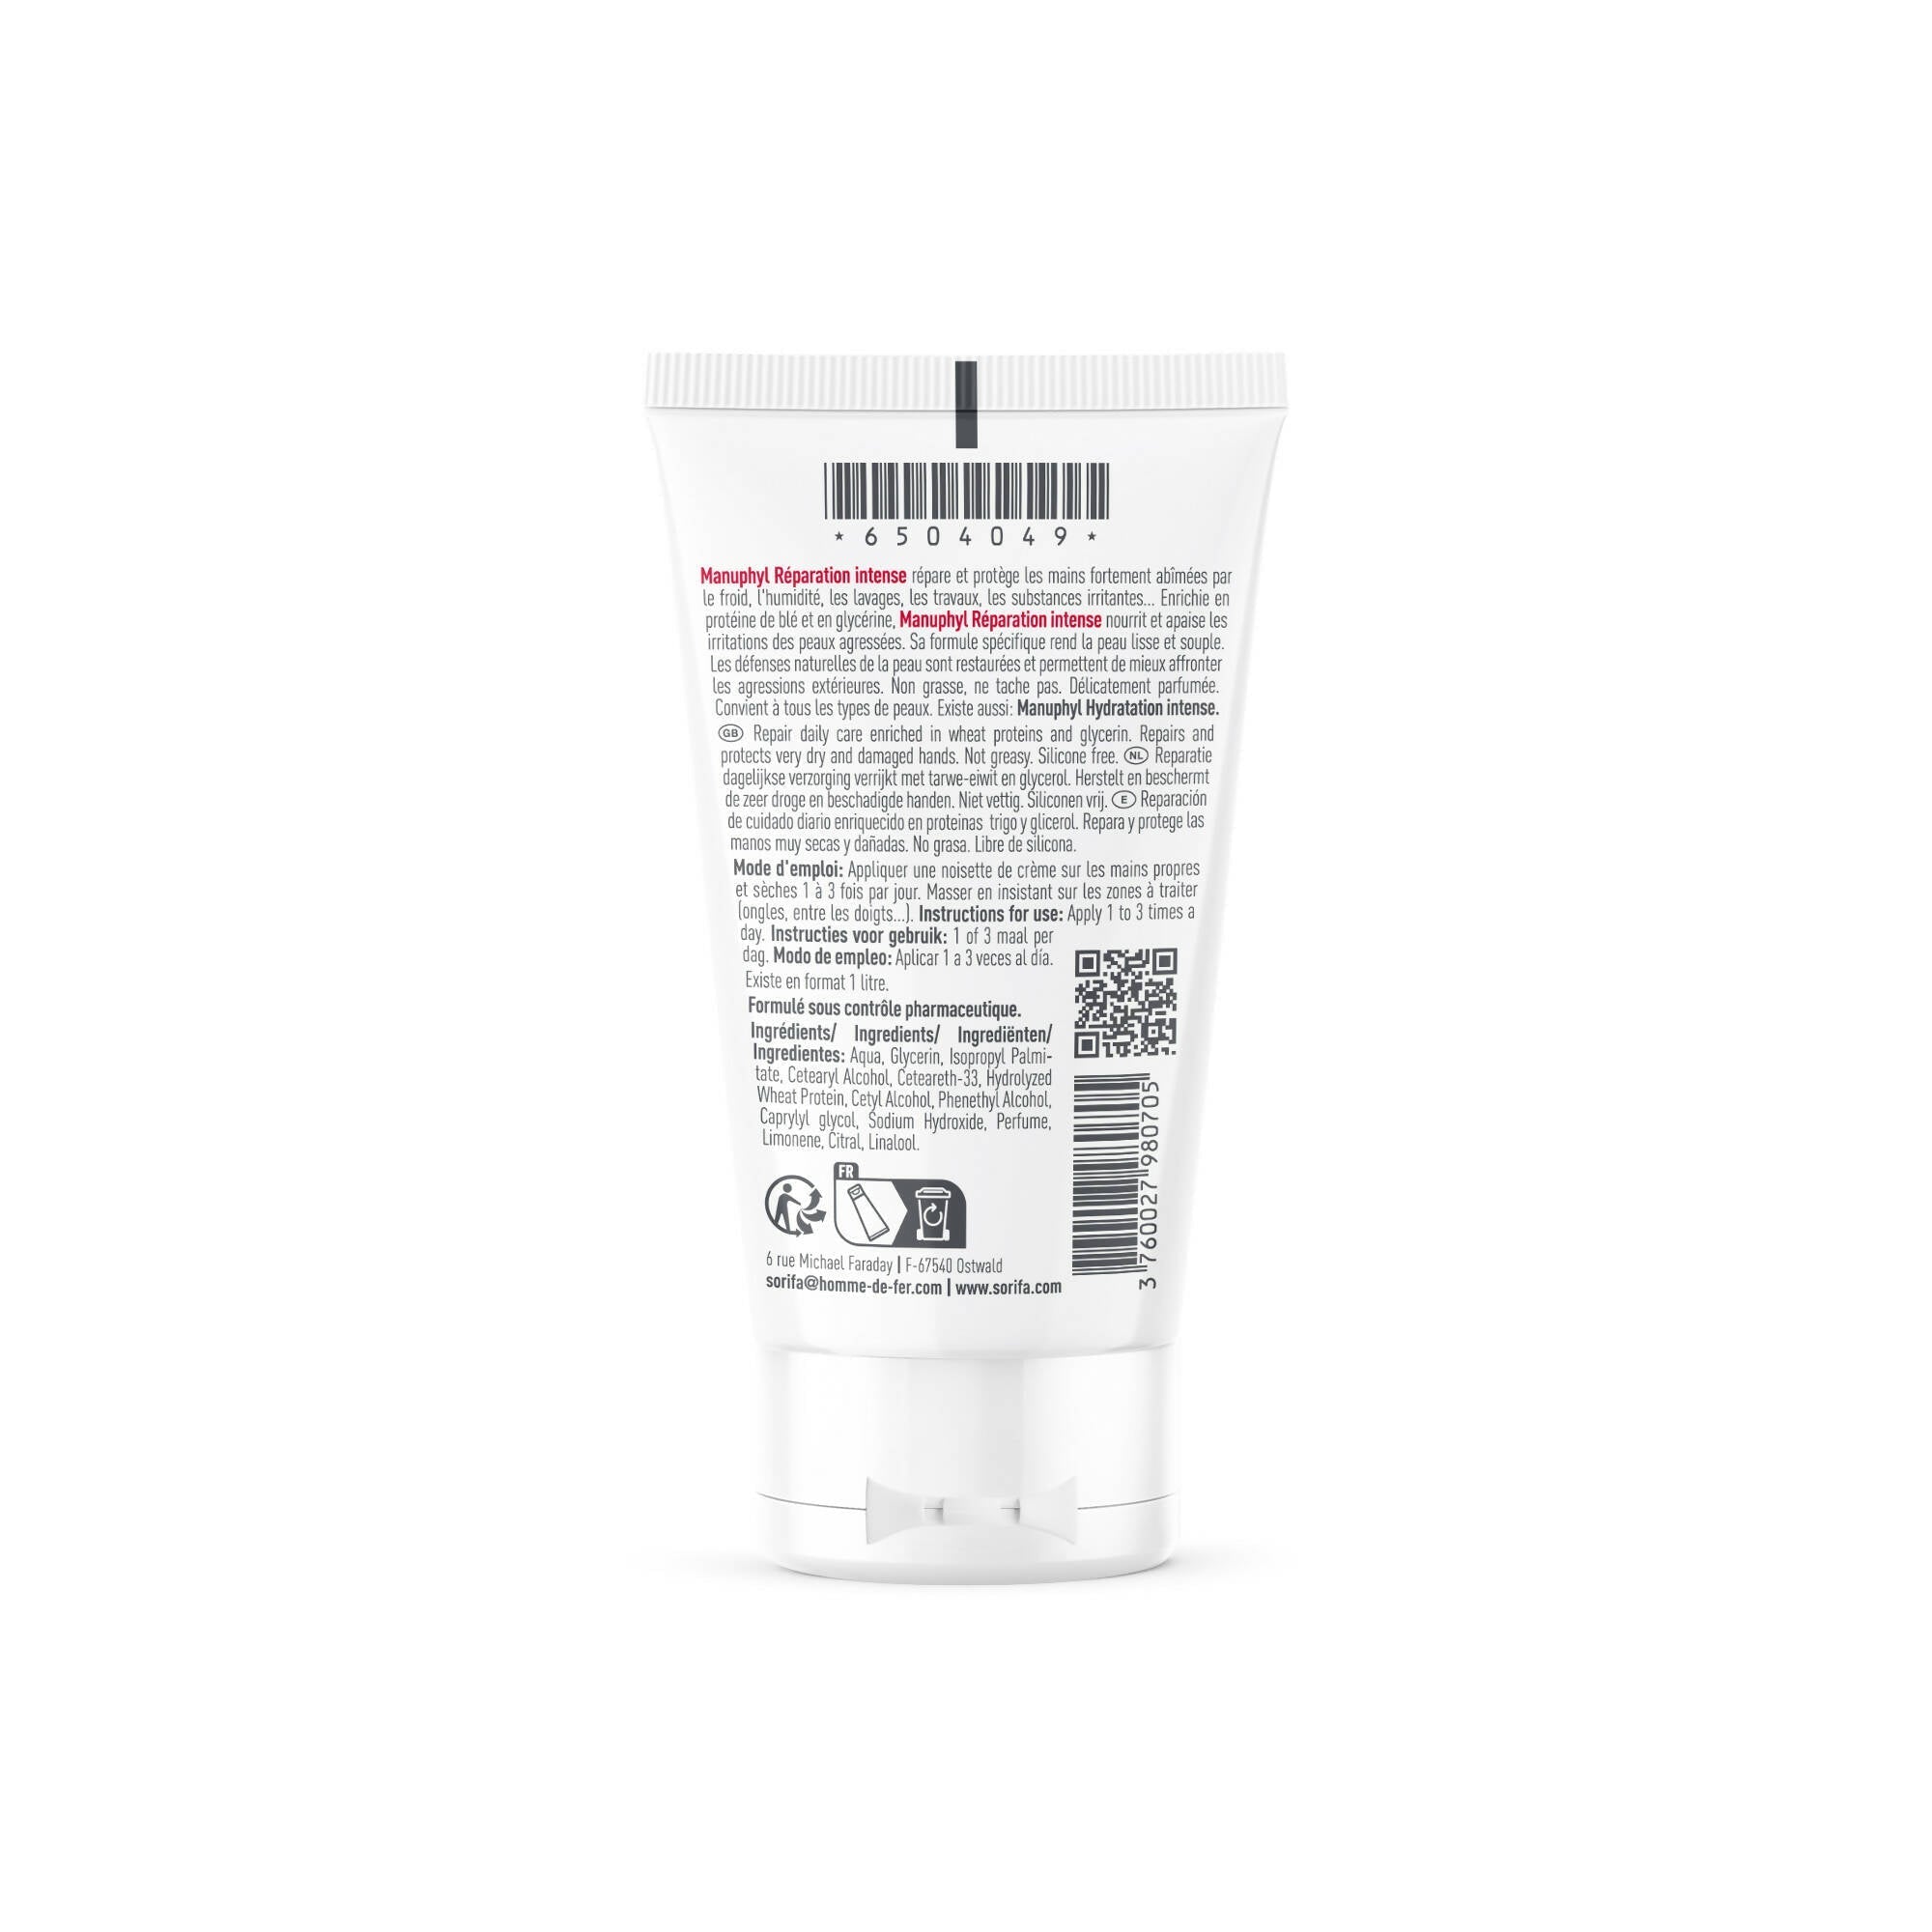 SORIFA - Manuphyl Intense Repair Hand Cream / Keelis - Repairs and protects - Very dry and damaged hands - Little oily, lightly scented, enriched with glycerin and wheat proteins - 50 ml tube - 0